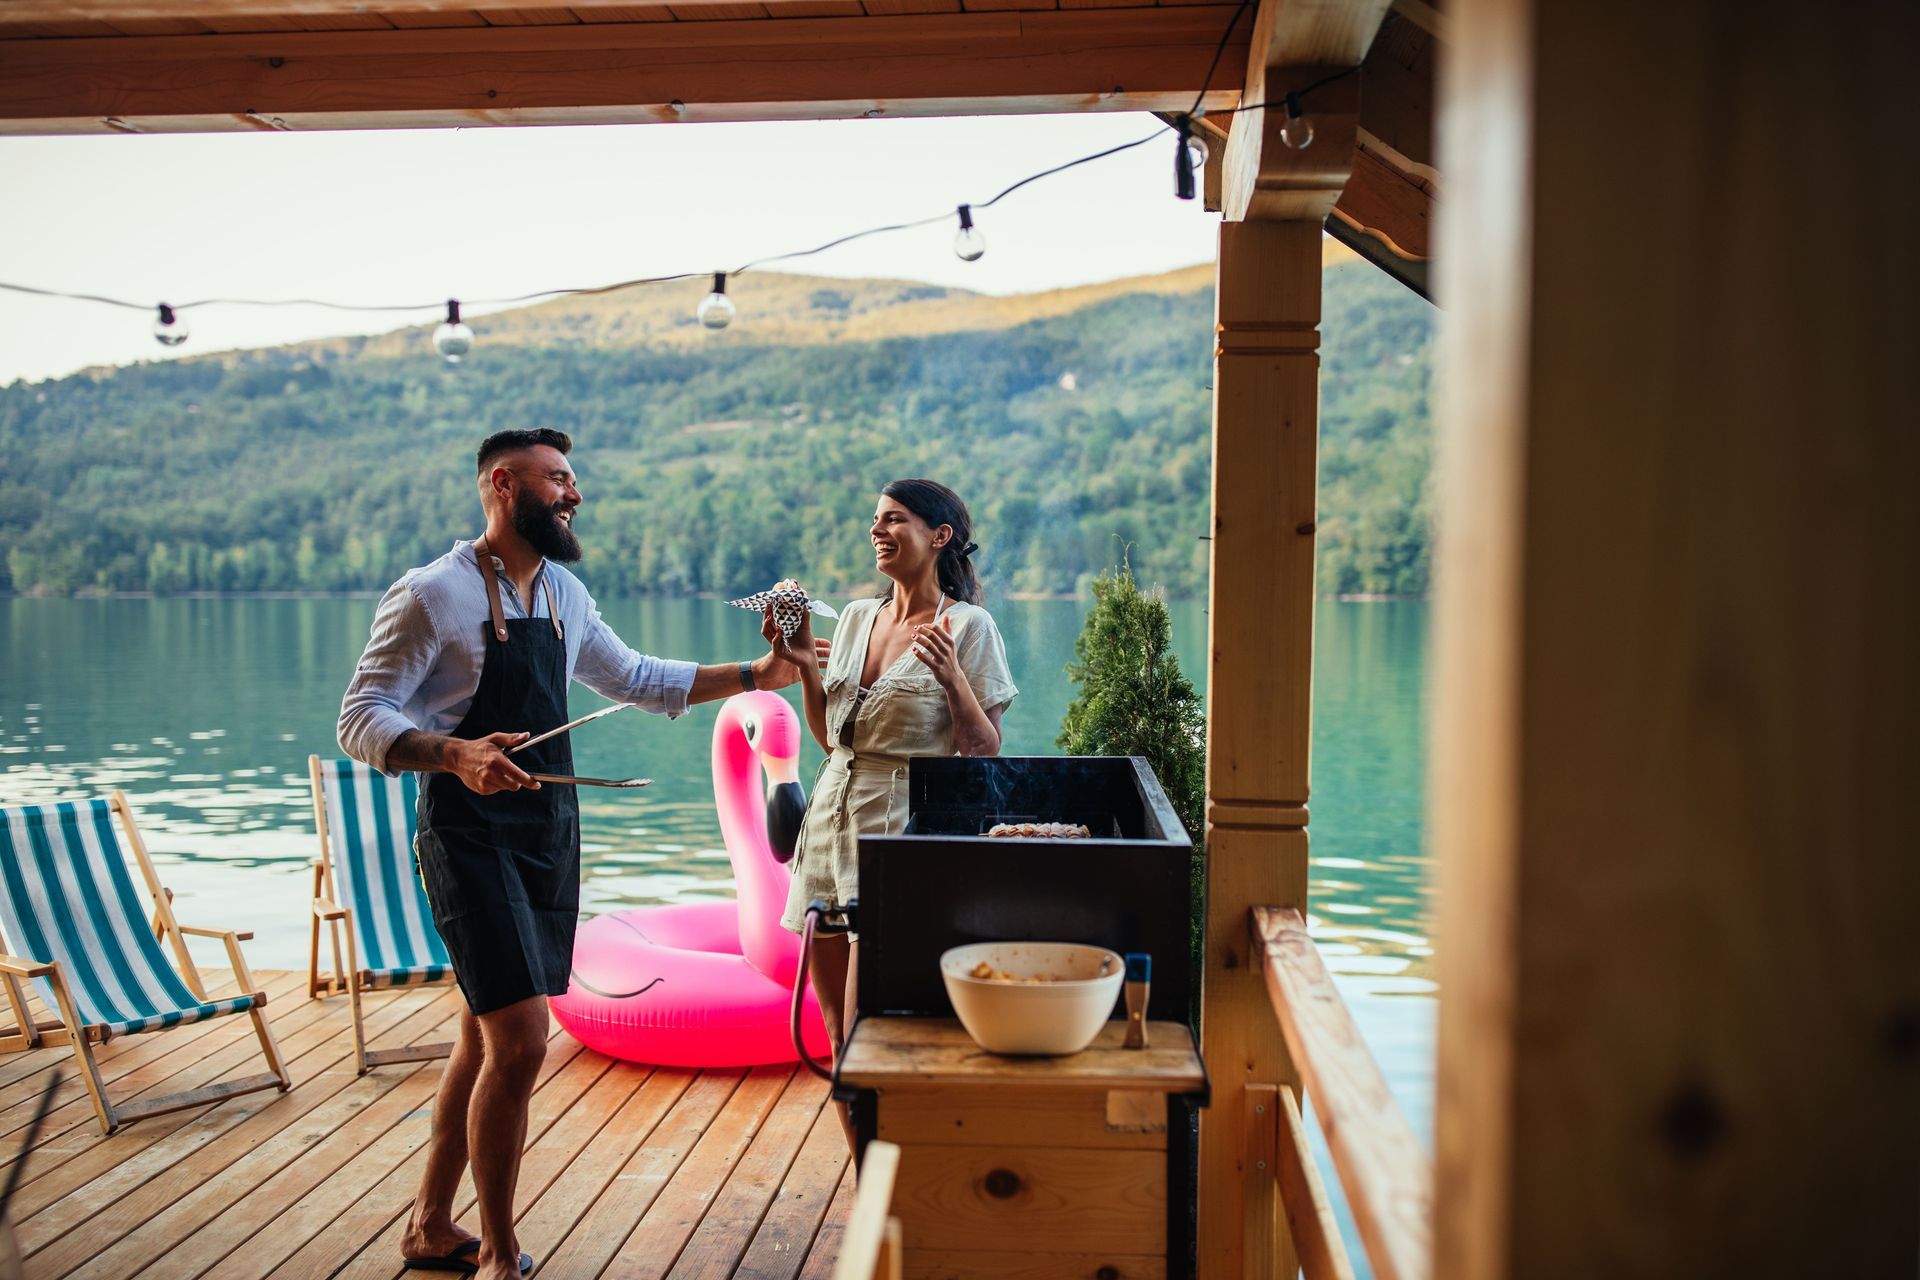 A man and a woman are having a barbecue on a dock next to a lake.